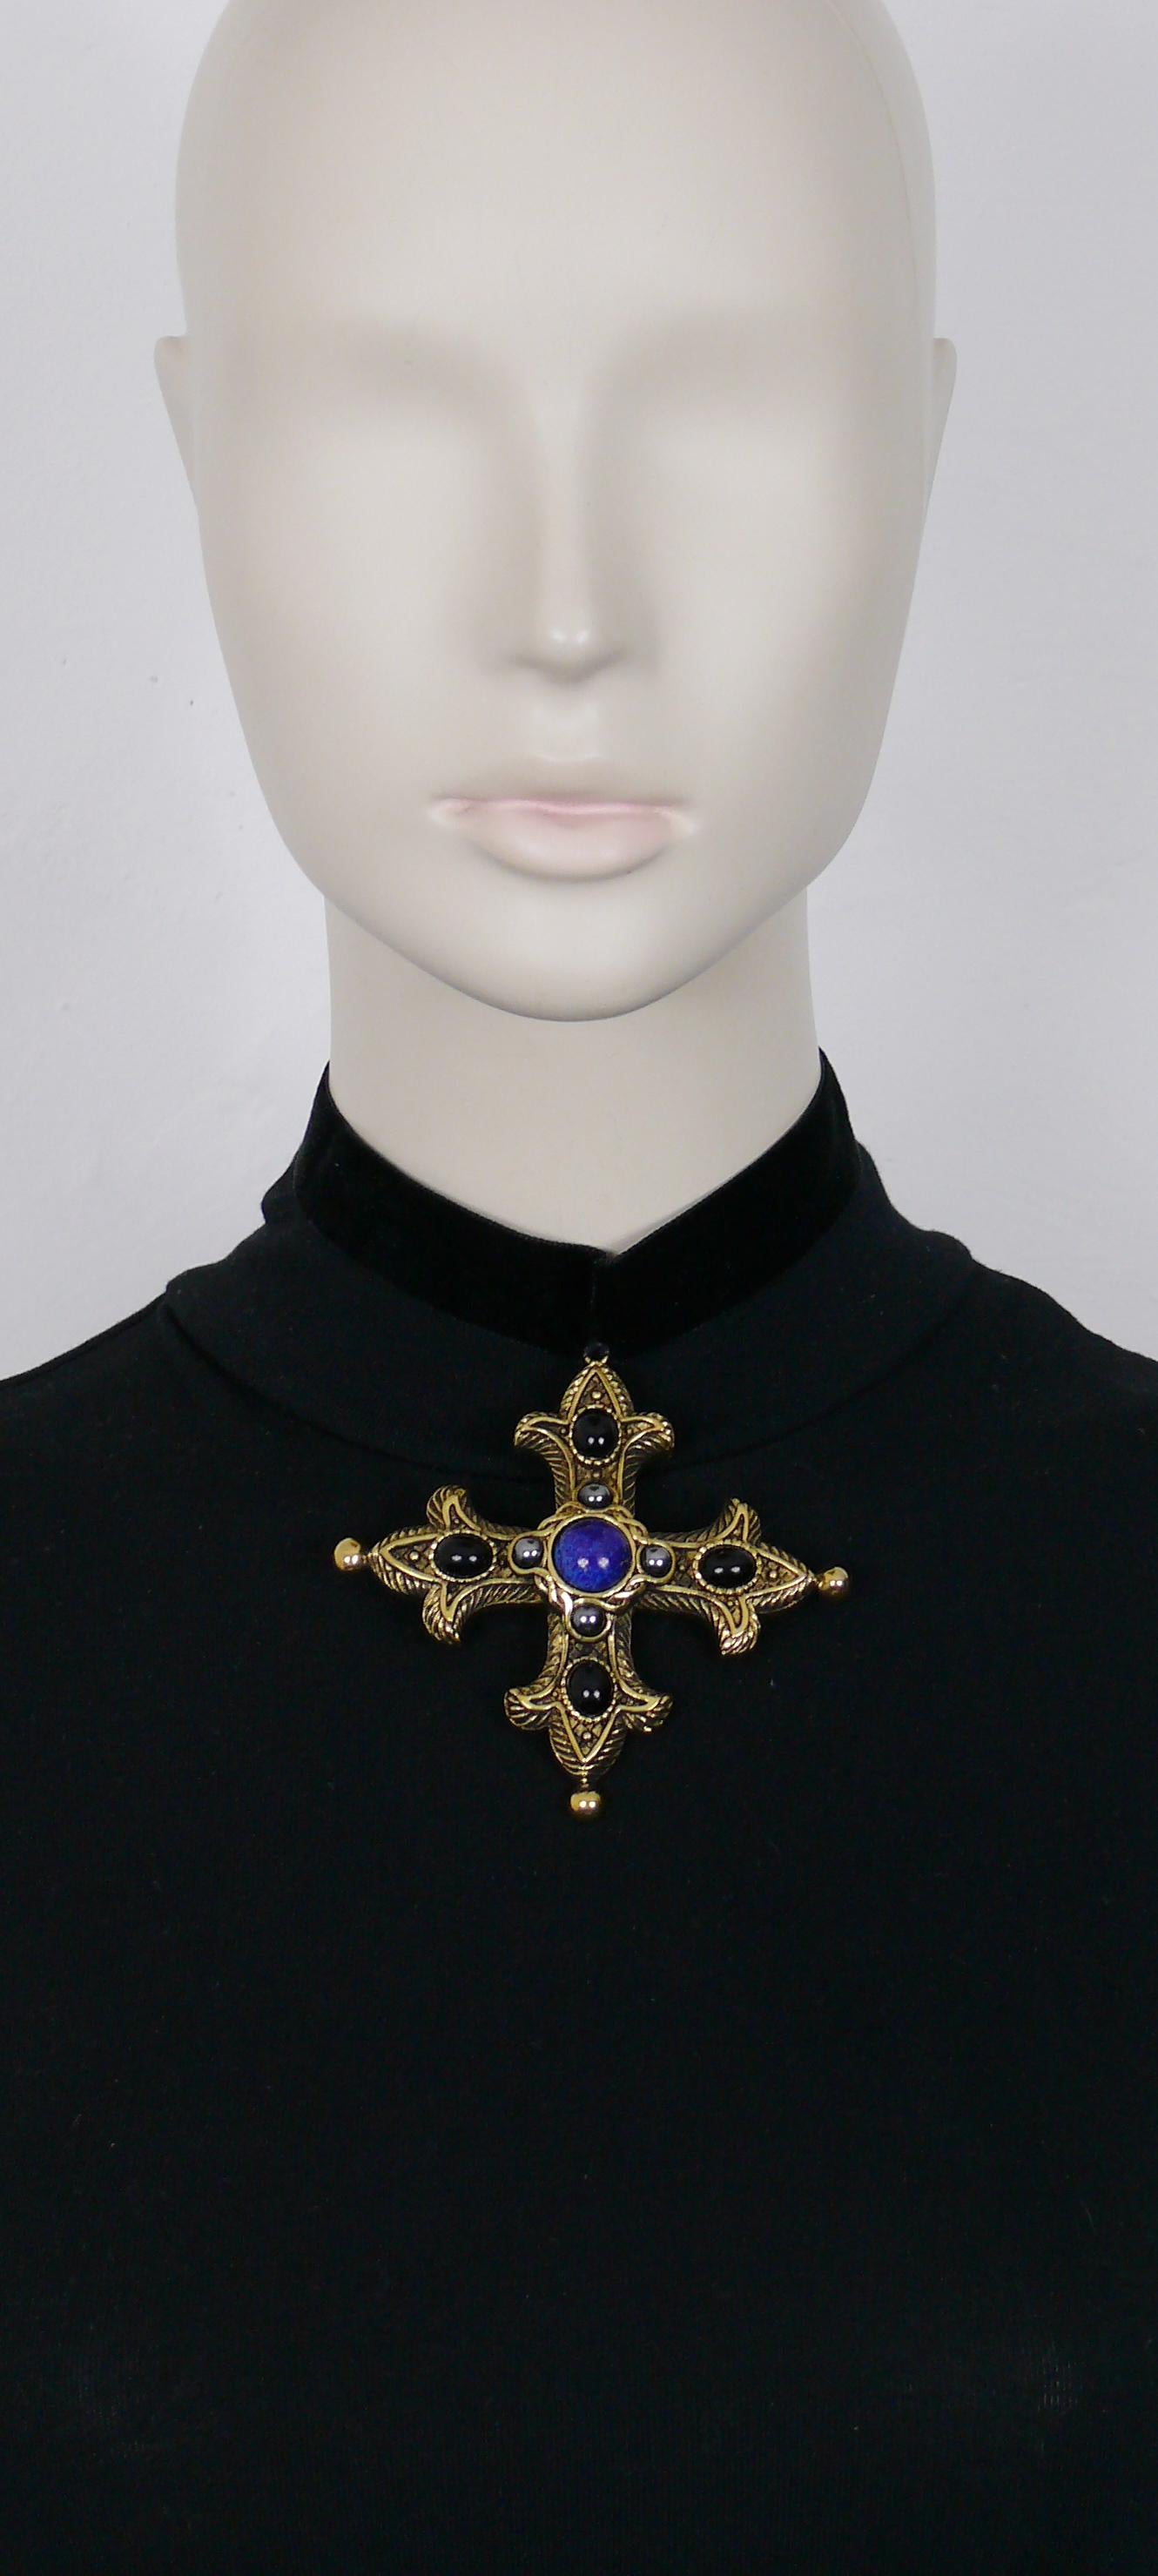 CHRISTIAN DIOR Boutique vintage antiqued gold toned cross pendant embellished with faux stones and black glass cabochons.

This cross pendant was recently sewn on a black velvet ribbon (see pictures 11 and 12).

Marked CHRISTIAN DIOR